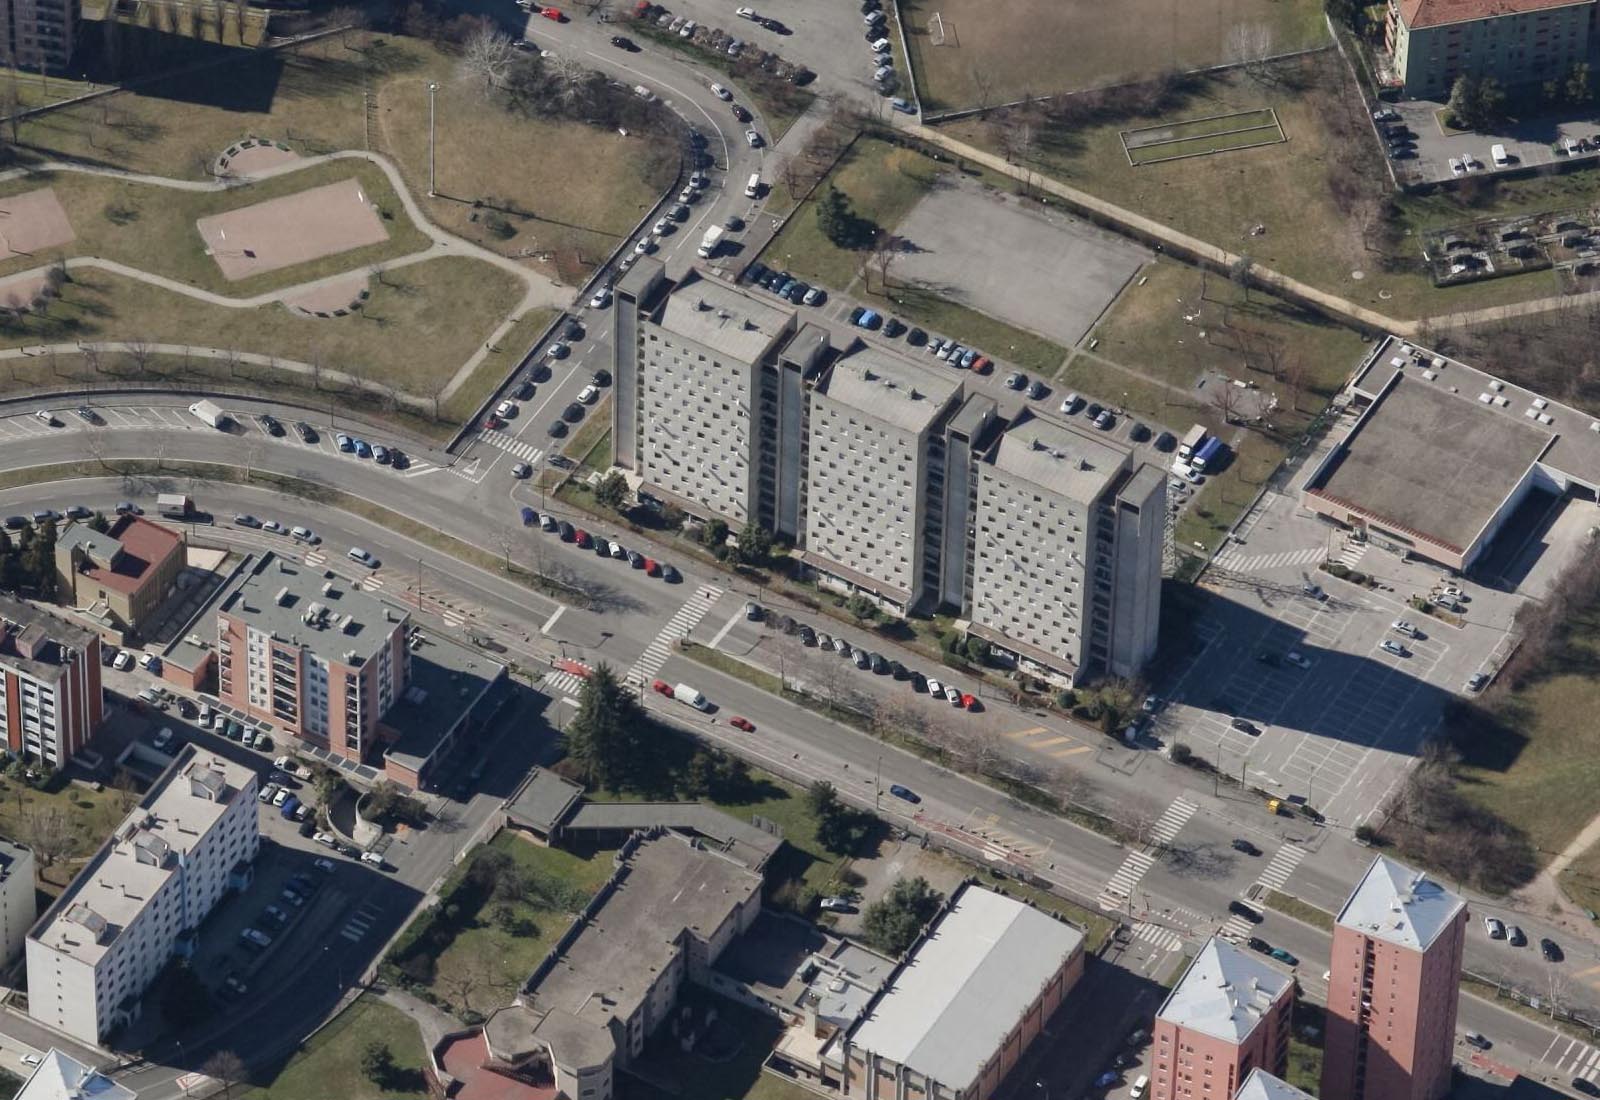 Residential buildings renovation in Sesto San Giovanni - Aerial view